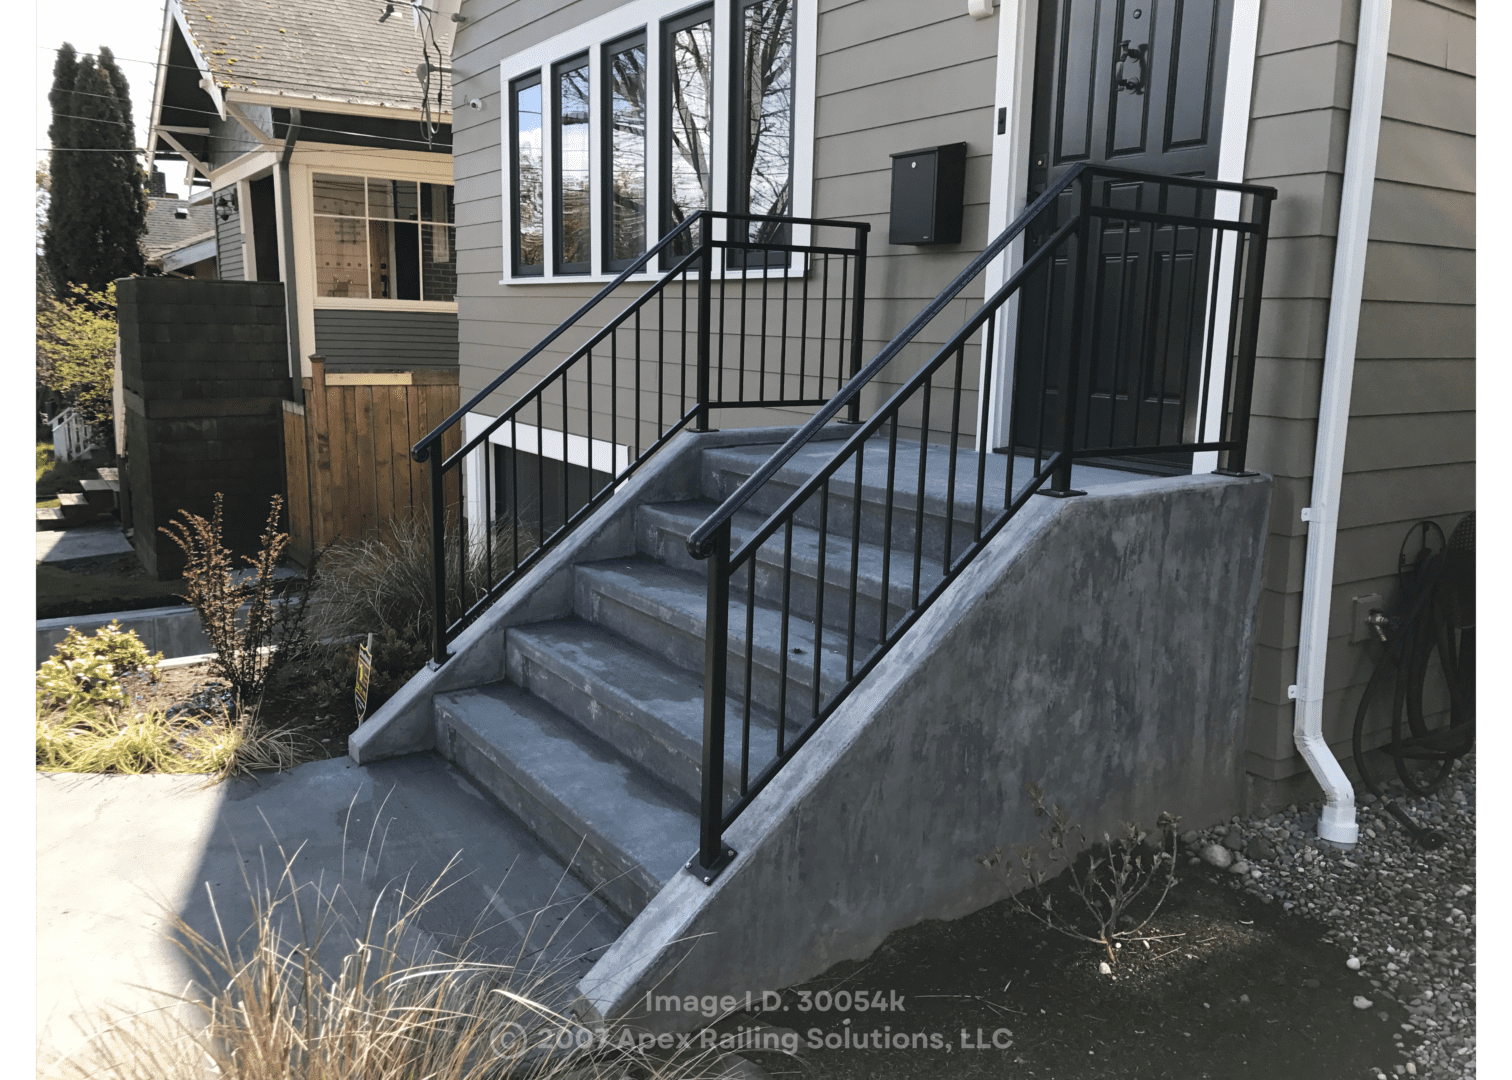 A staircase leading to a house’s front door